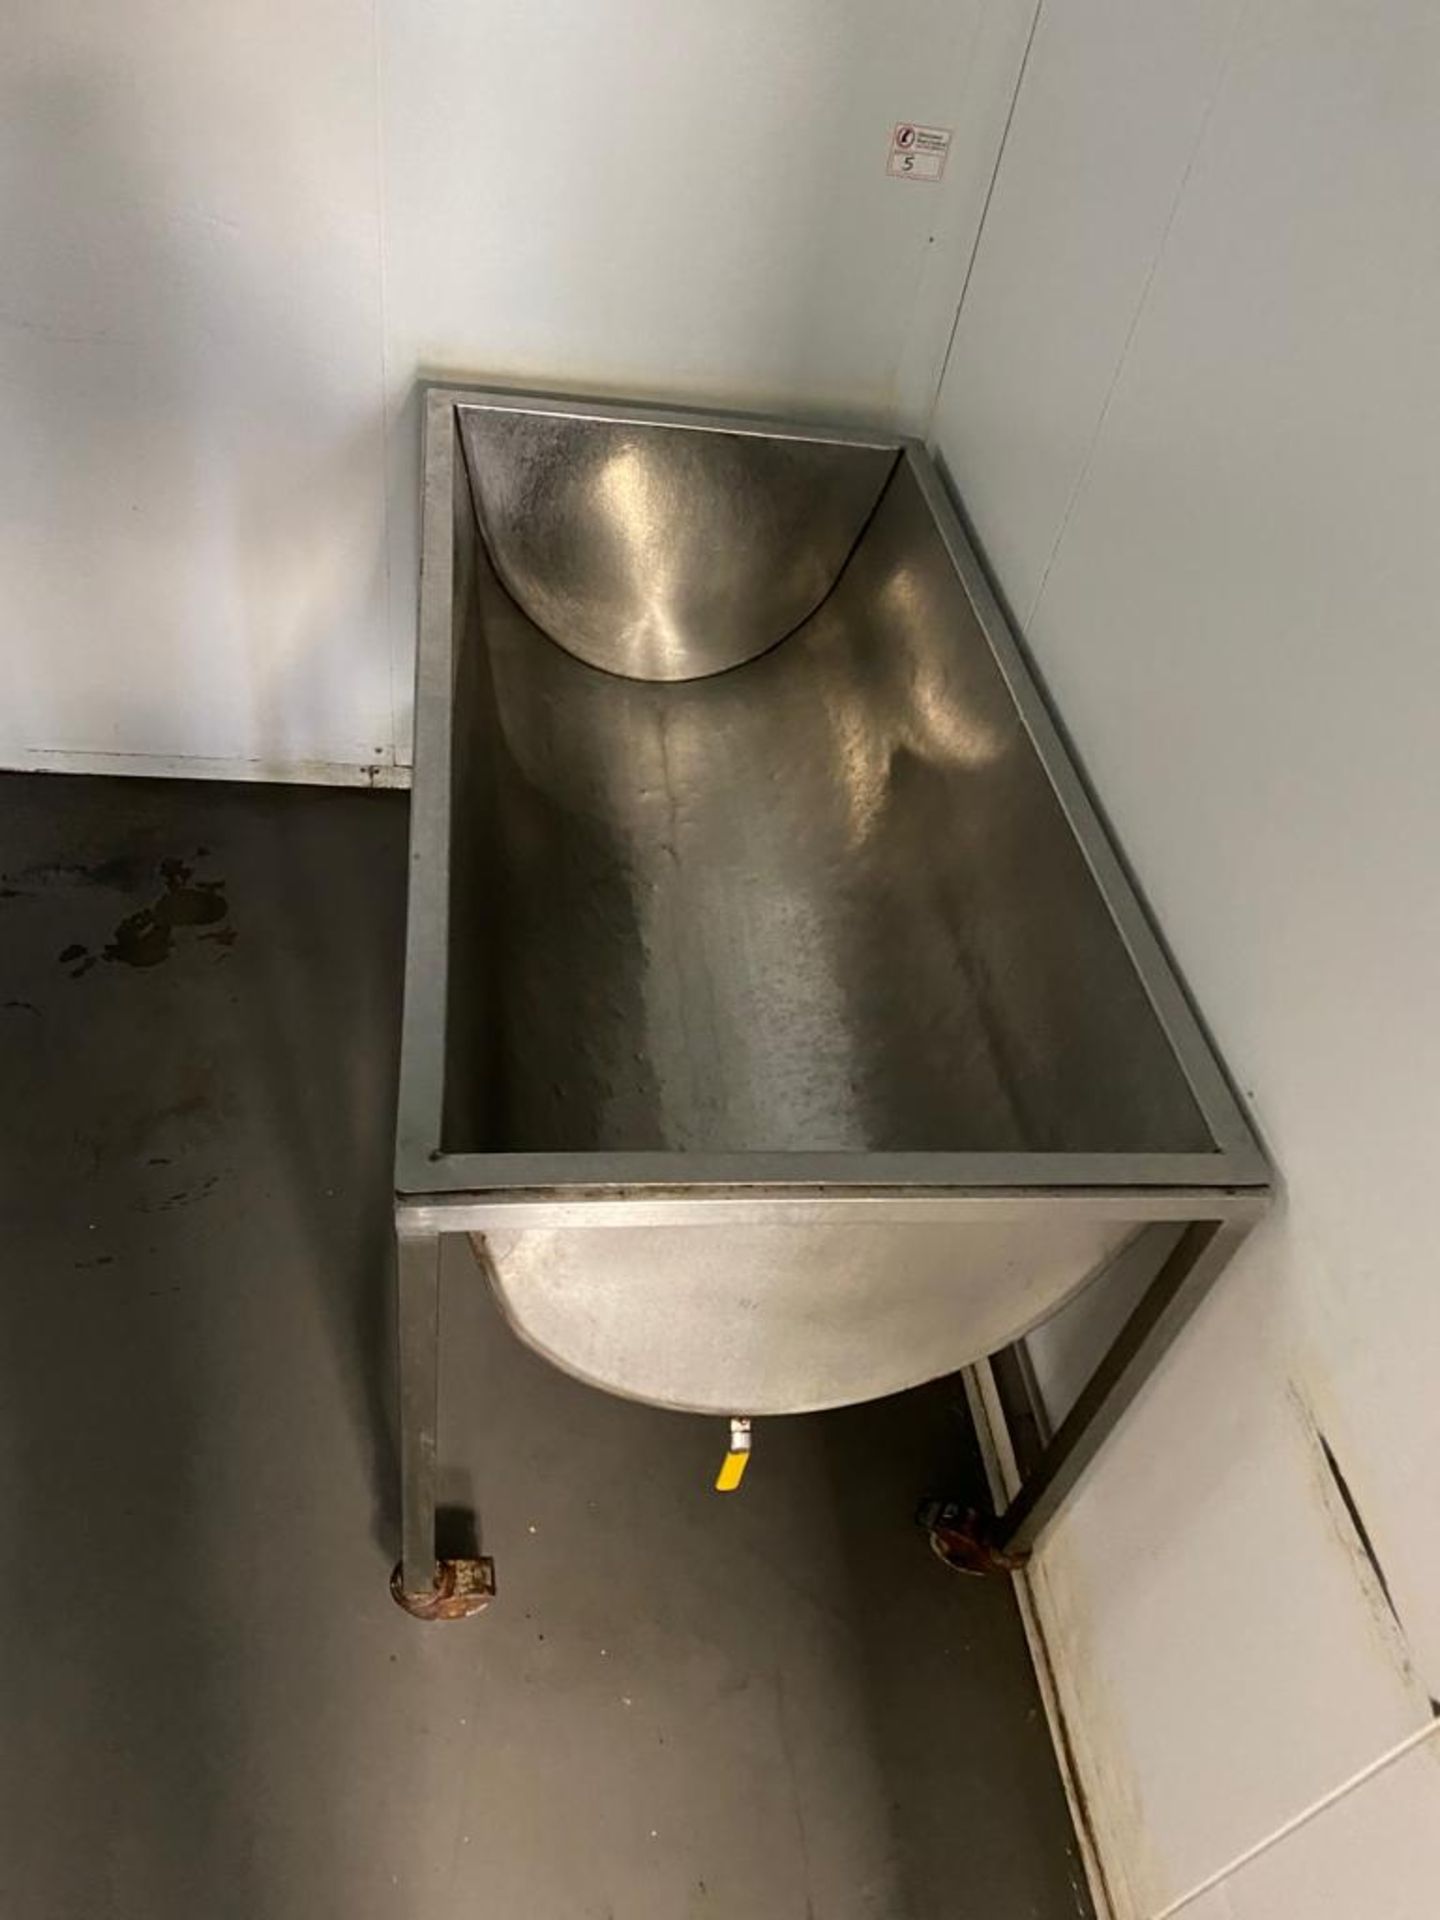 STAINLESS STEEL TROUGH - Image 2 of 3